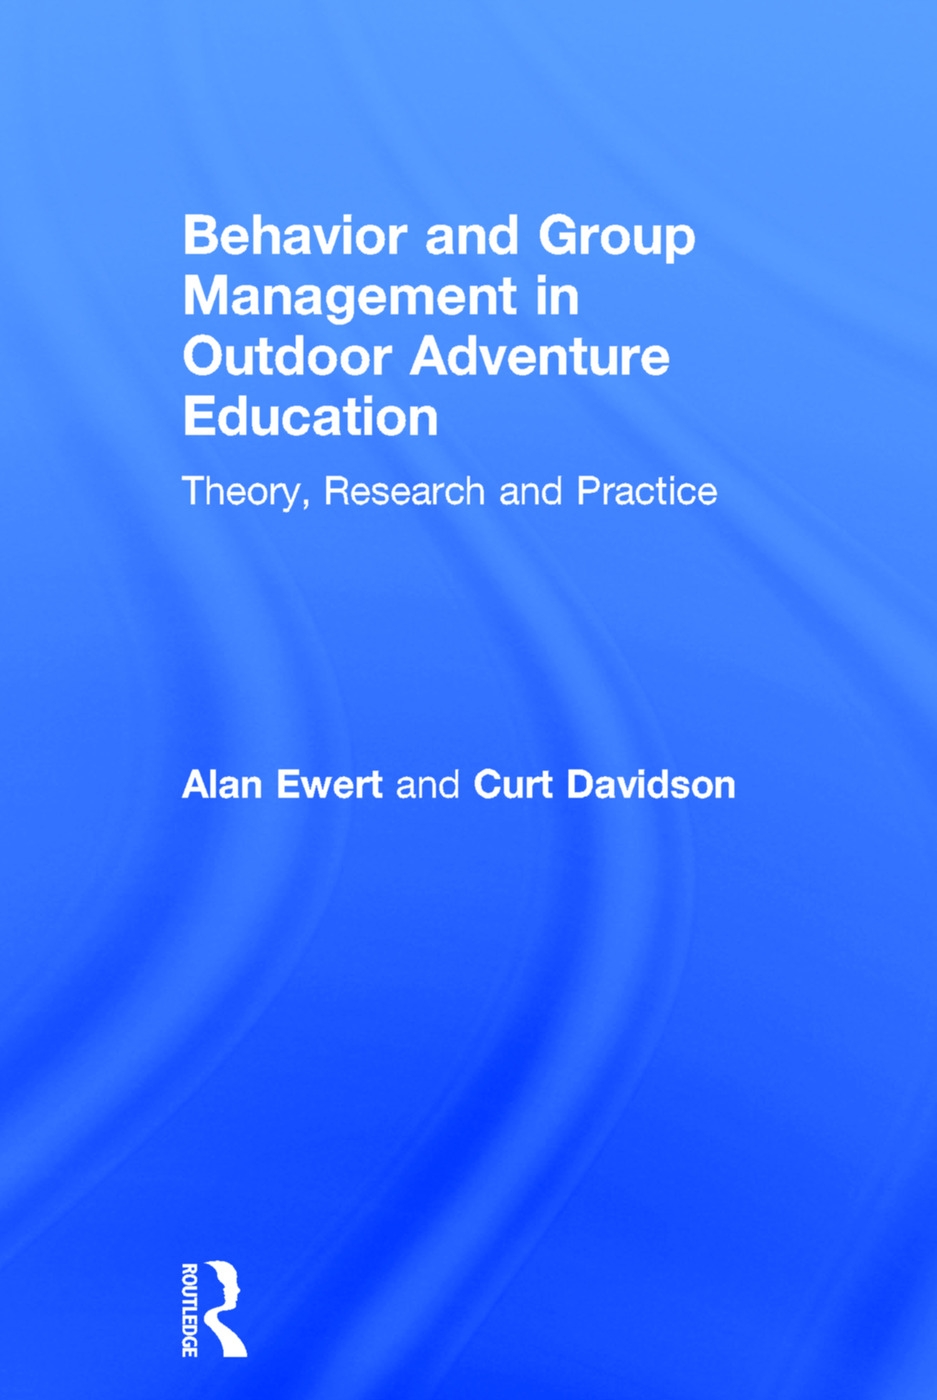 Behavior and Group Management in Outdoor Adventure Education: Theory, Research and Practice